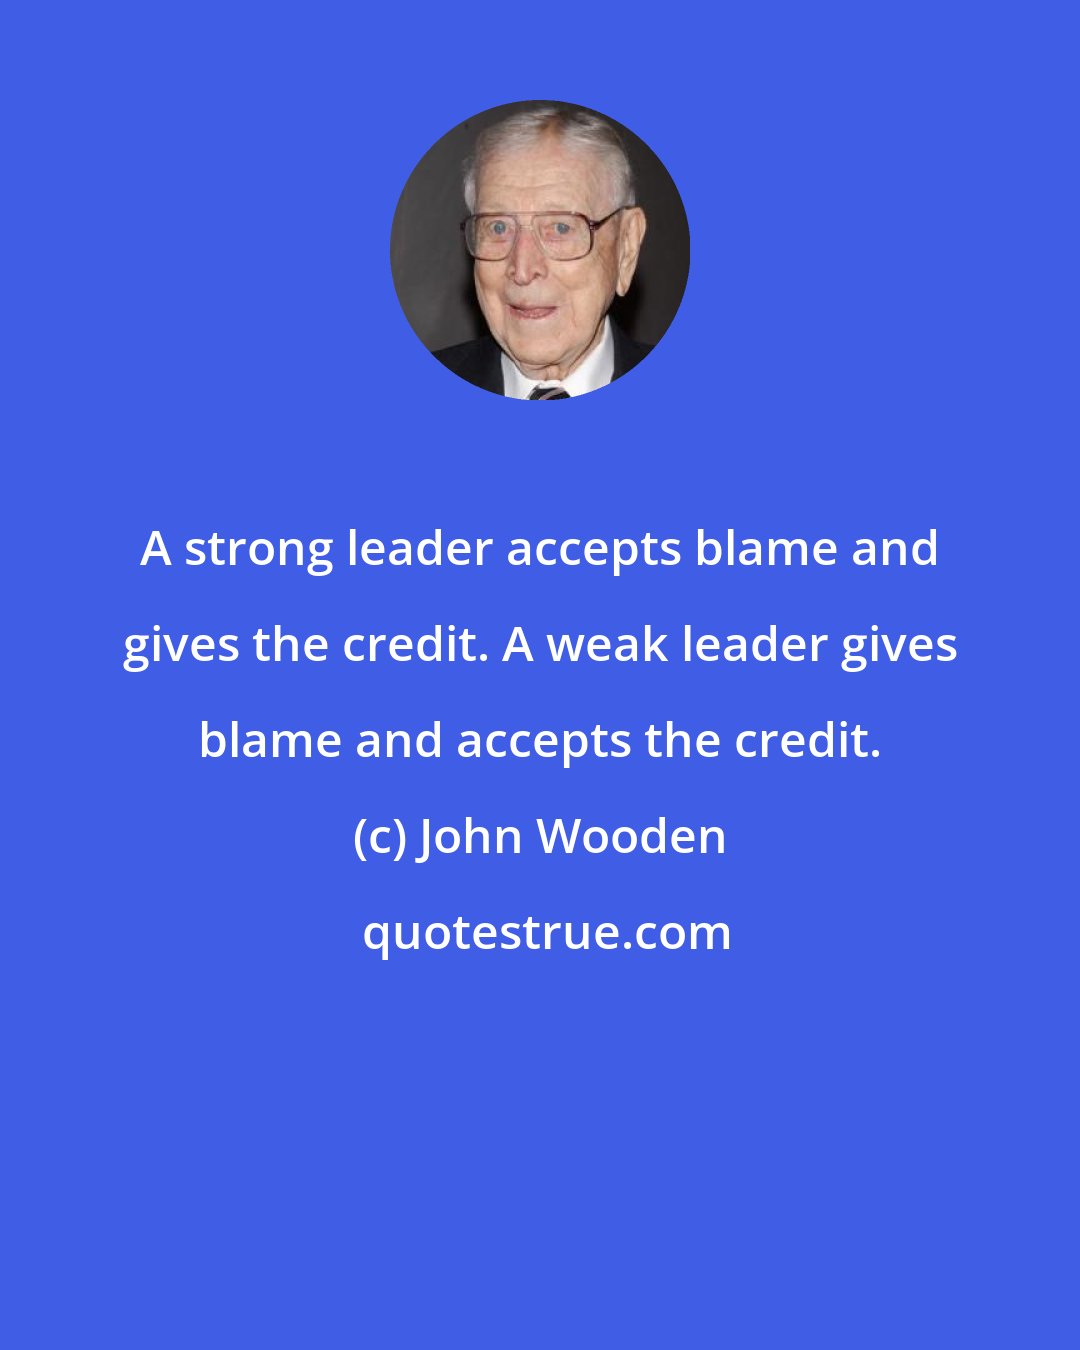 John Wooden: A strong leader accepts blame and gives the credit. A weak leader gives blame and accepts the credit.